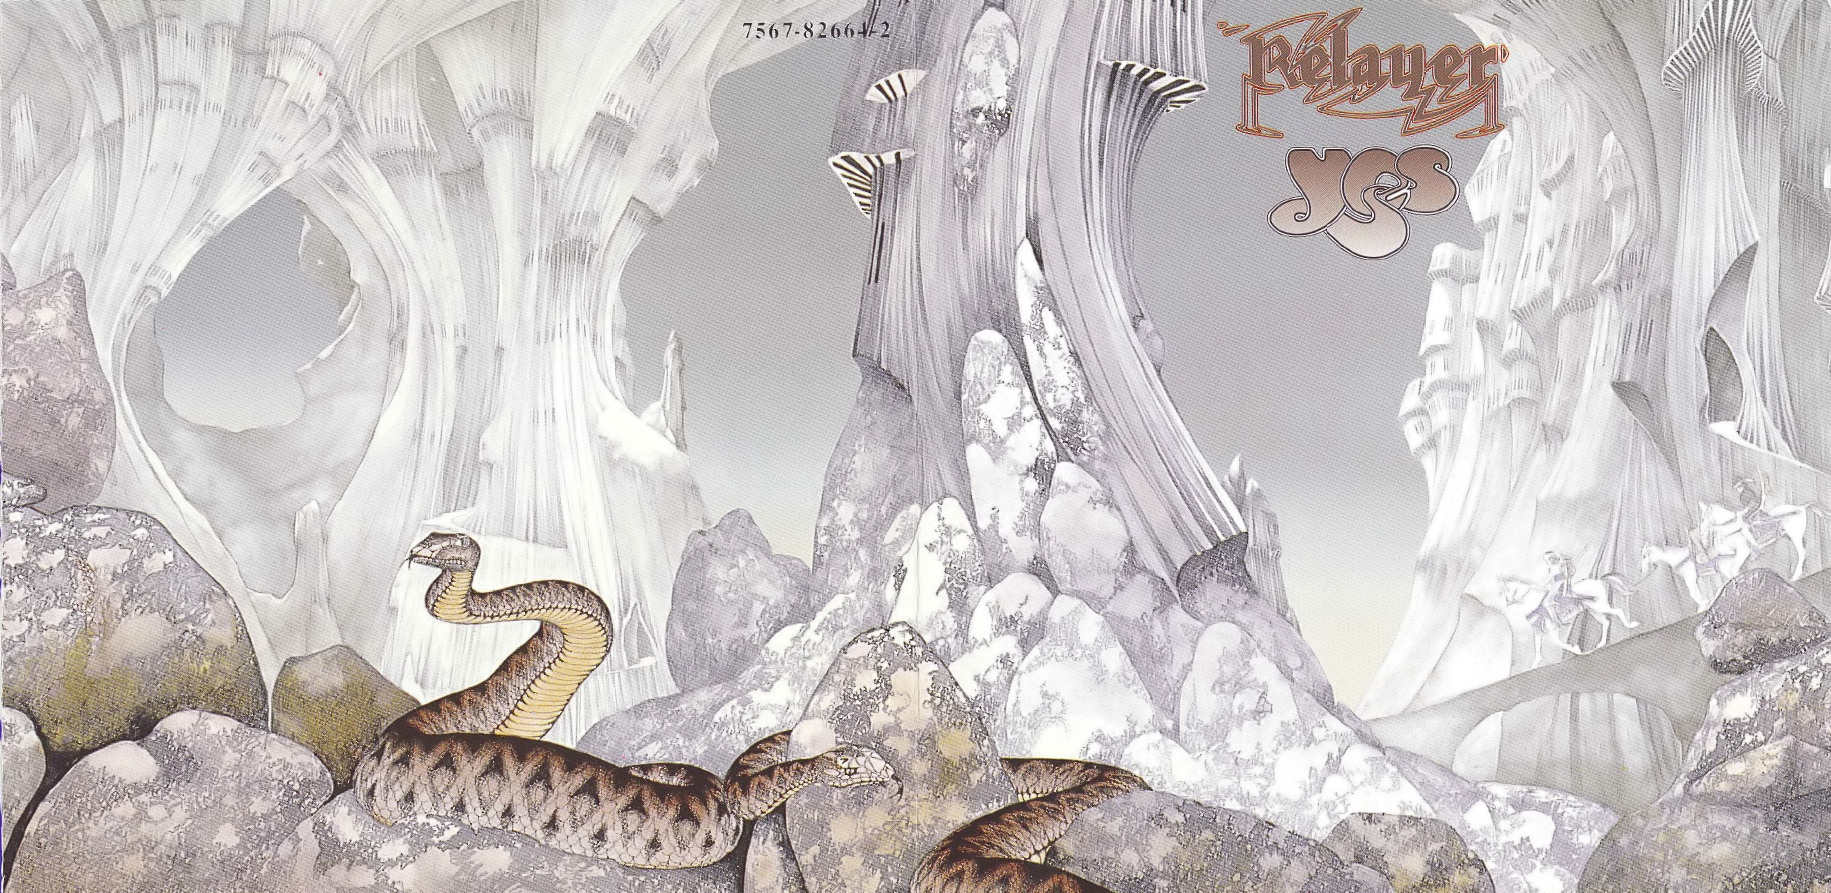  Dean Album Covers Riding 1974 Cover Art 70s Yes Relayer